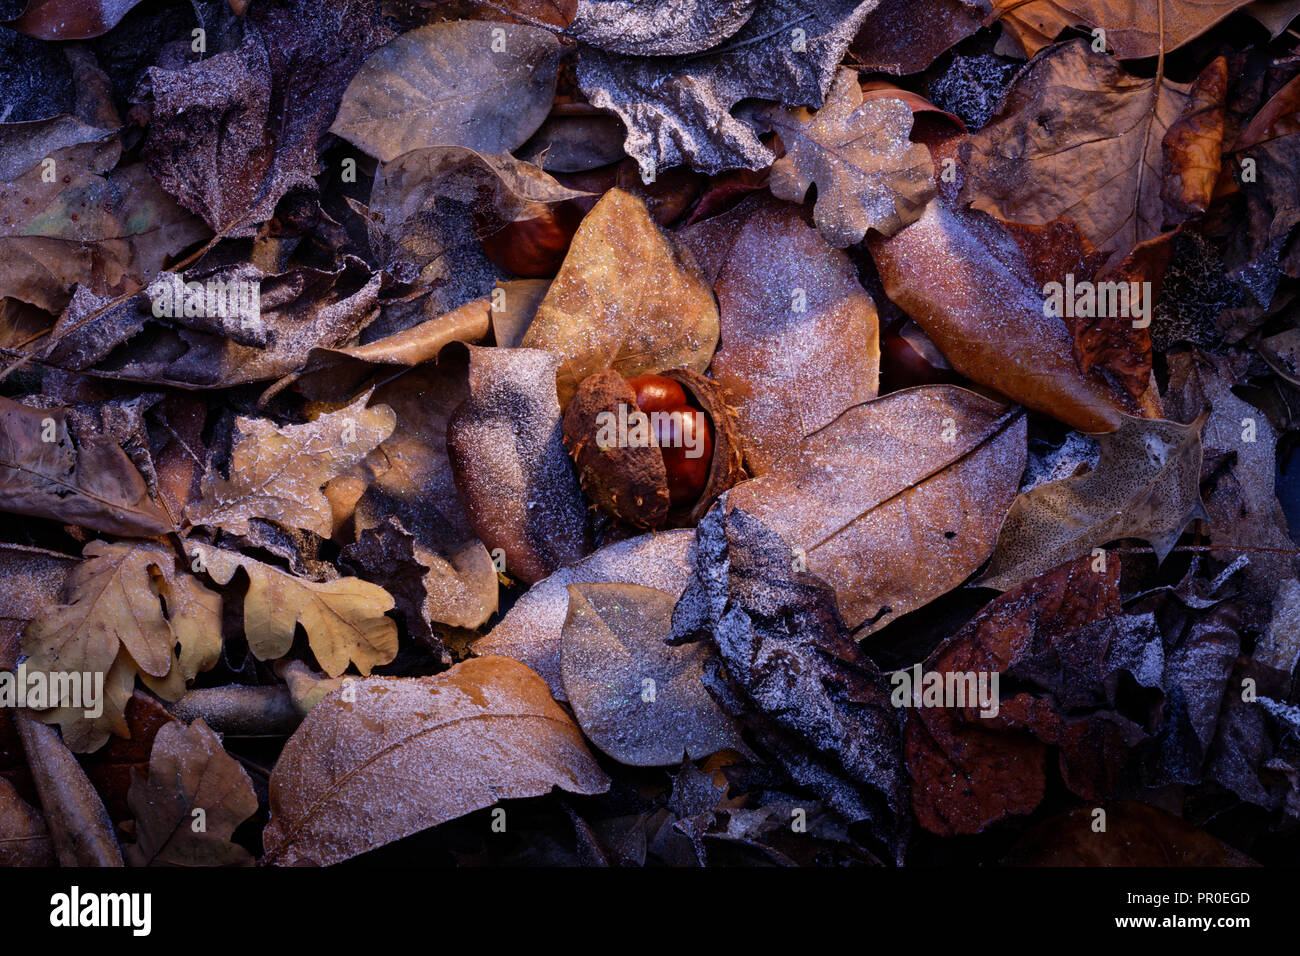 Two conkers in their shell amoungst some fallen leaves. Stock Photo